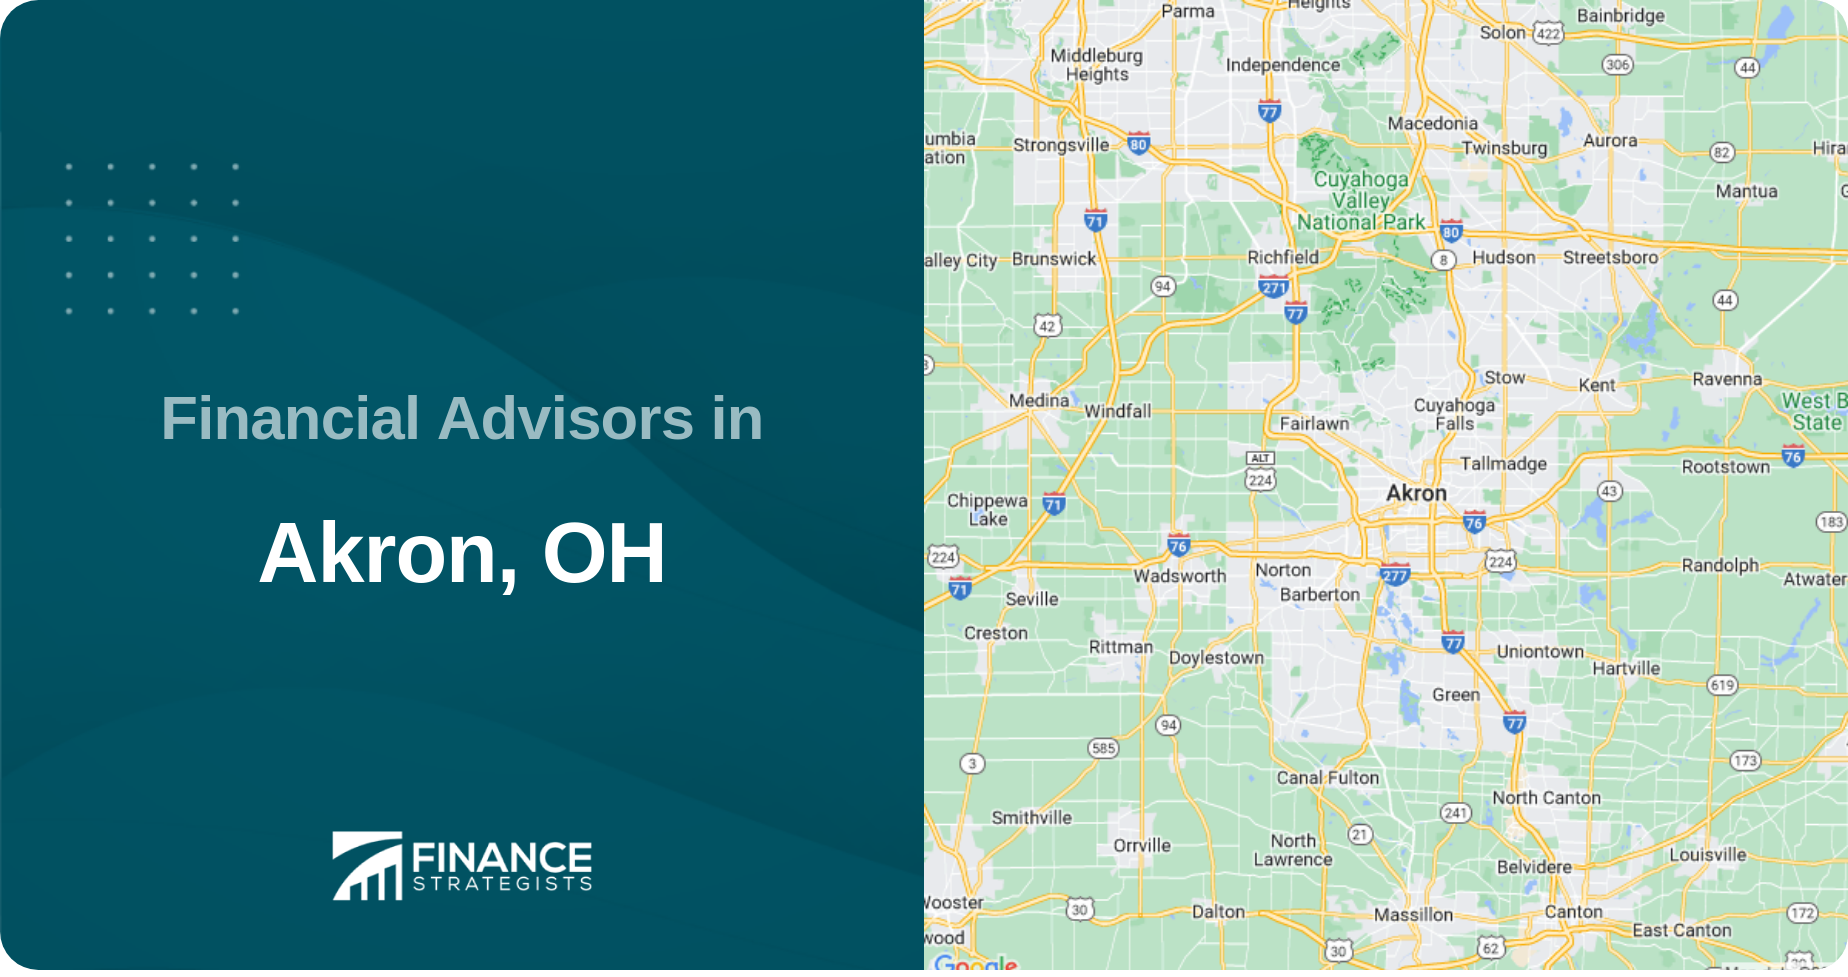 Financial Advisors in Akron, OH